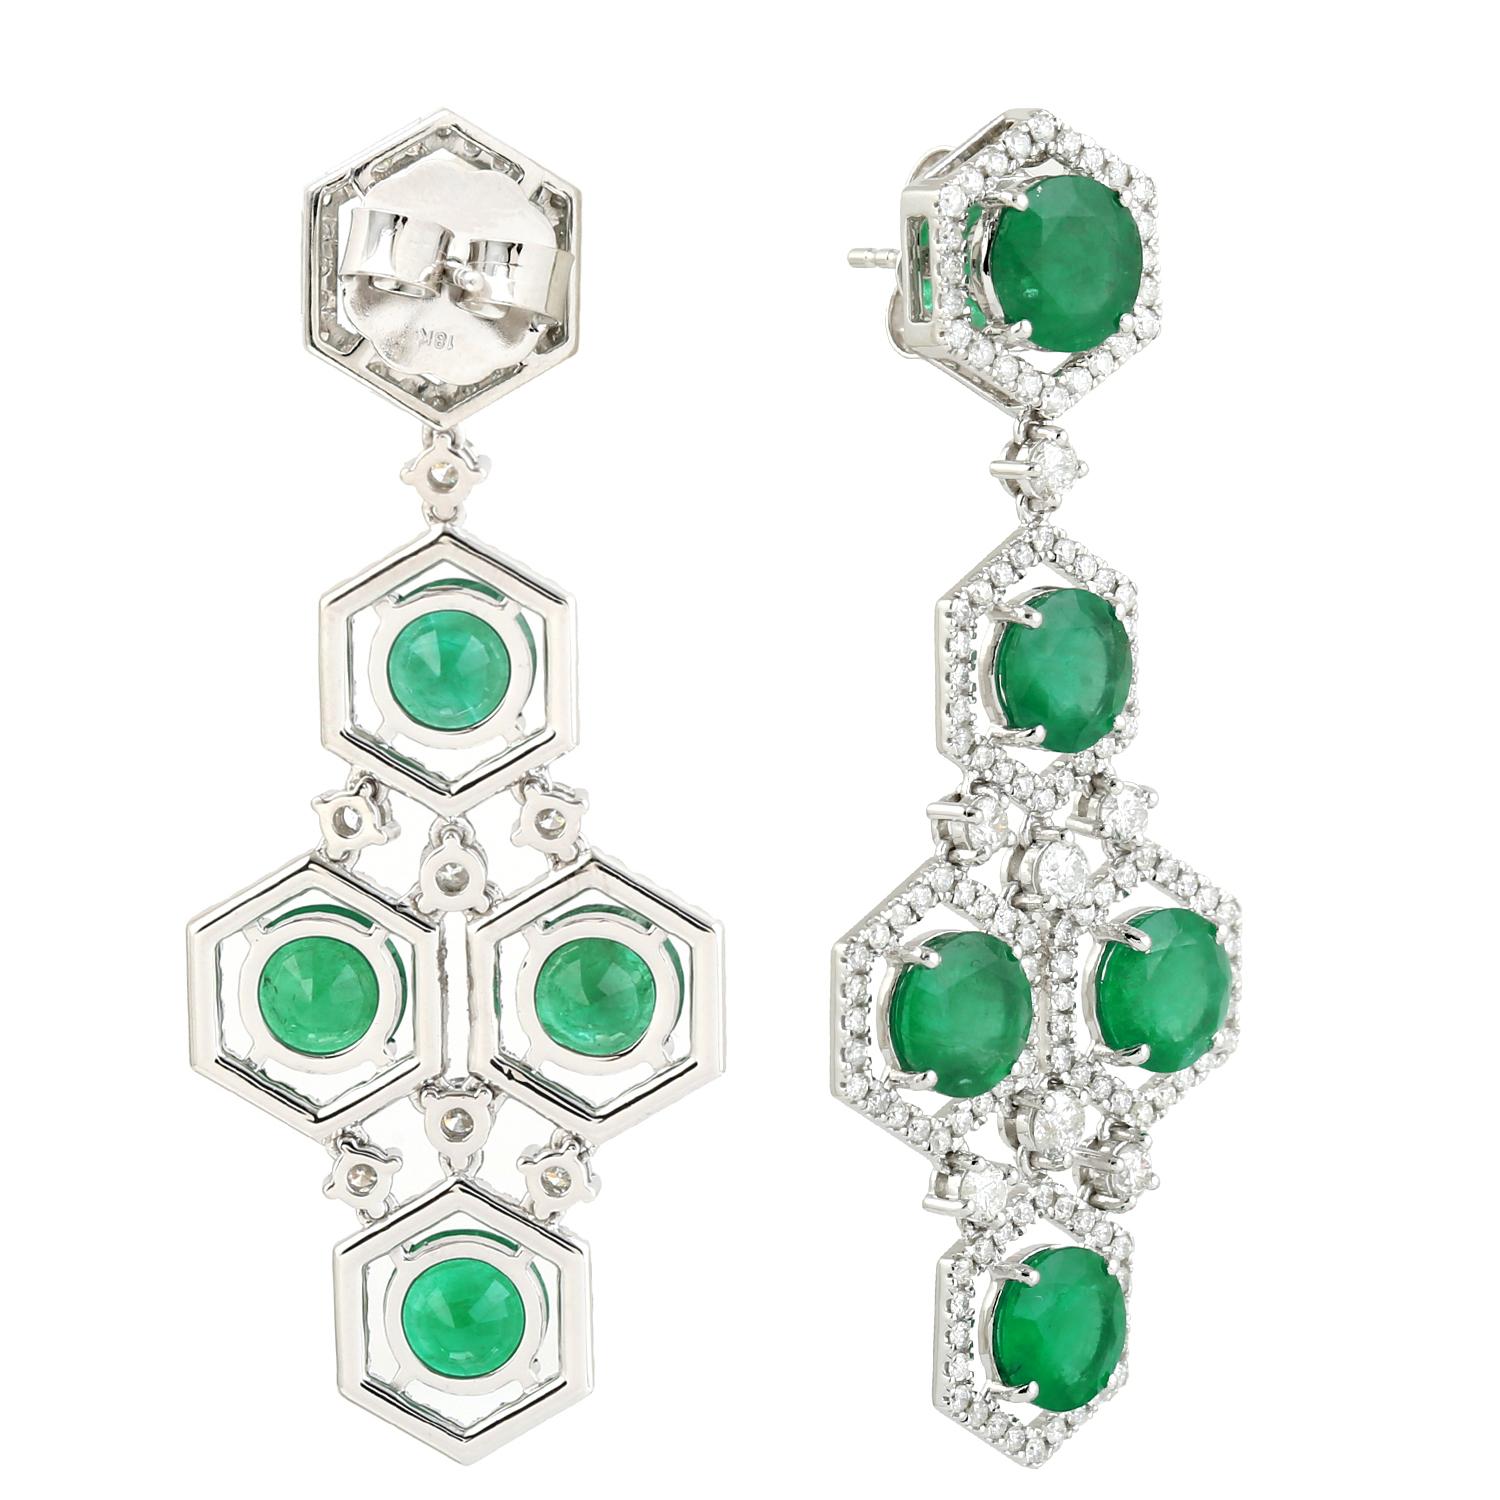 Art Nouveau Round Emerald Long Earrings With Diamonds Made In 18k White Gold For Sale